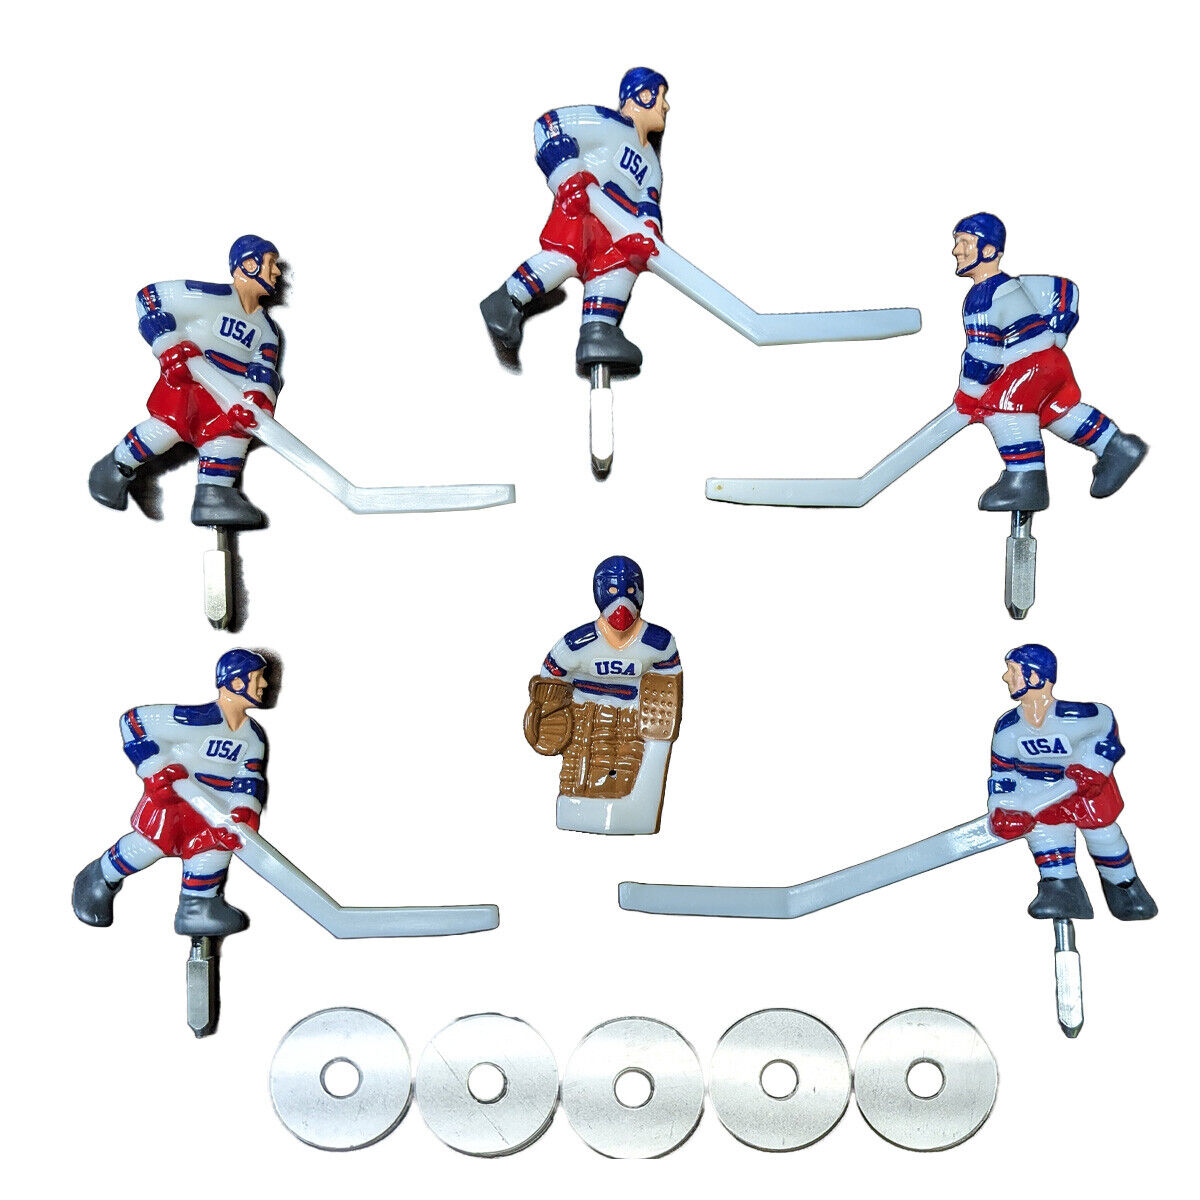 Super Chexx USA American Replacement Player Set - 6 Men